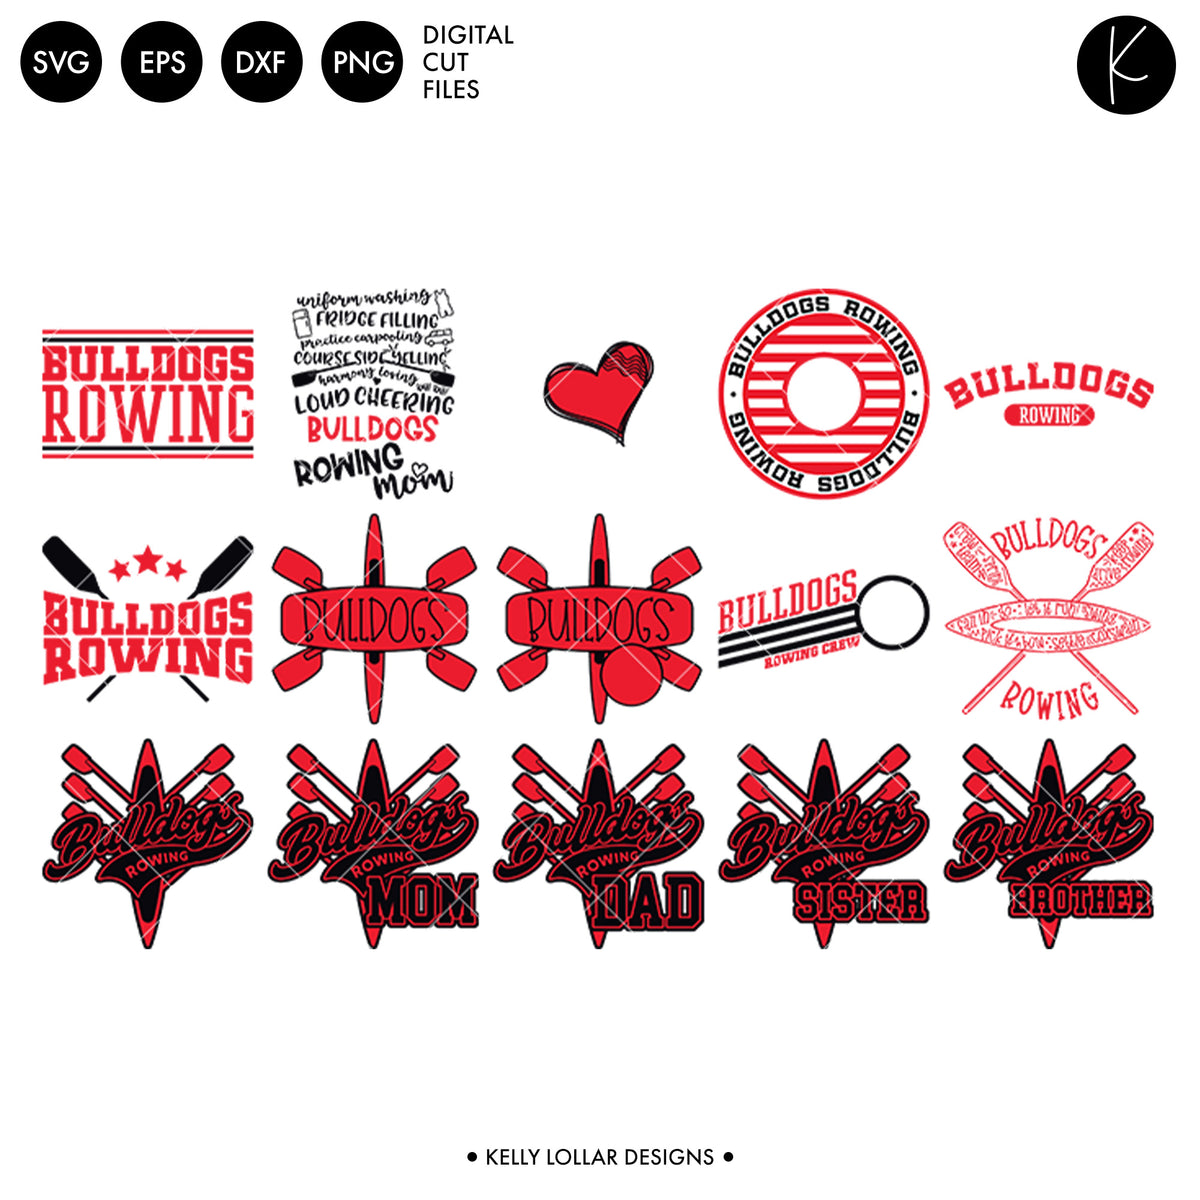 Bulldogs Rowing Crew Bundle | SVG DXF EPS PNG Cut Files